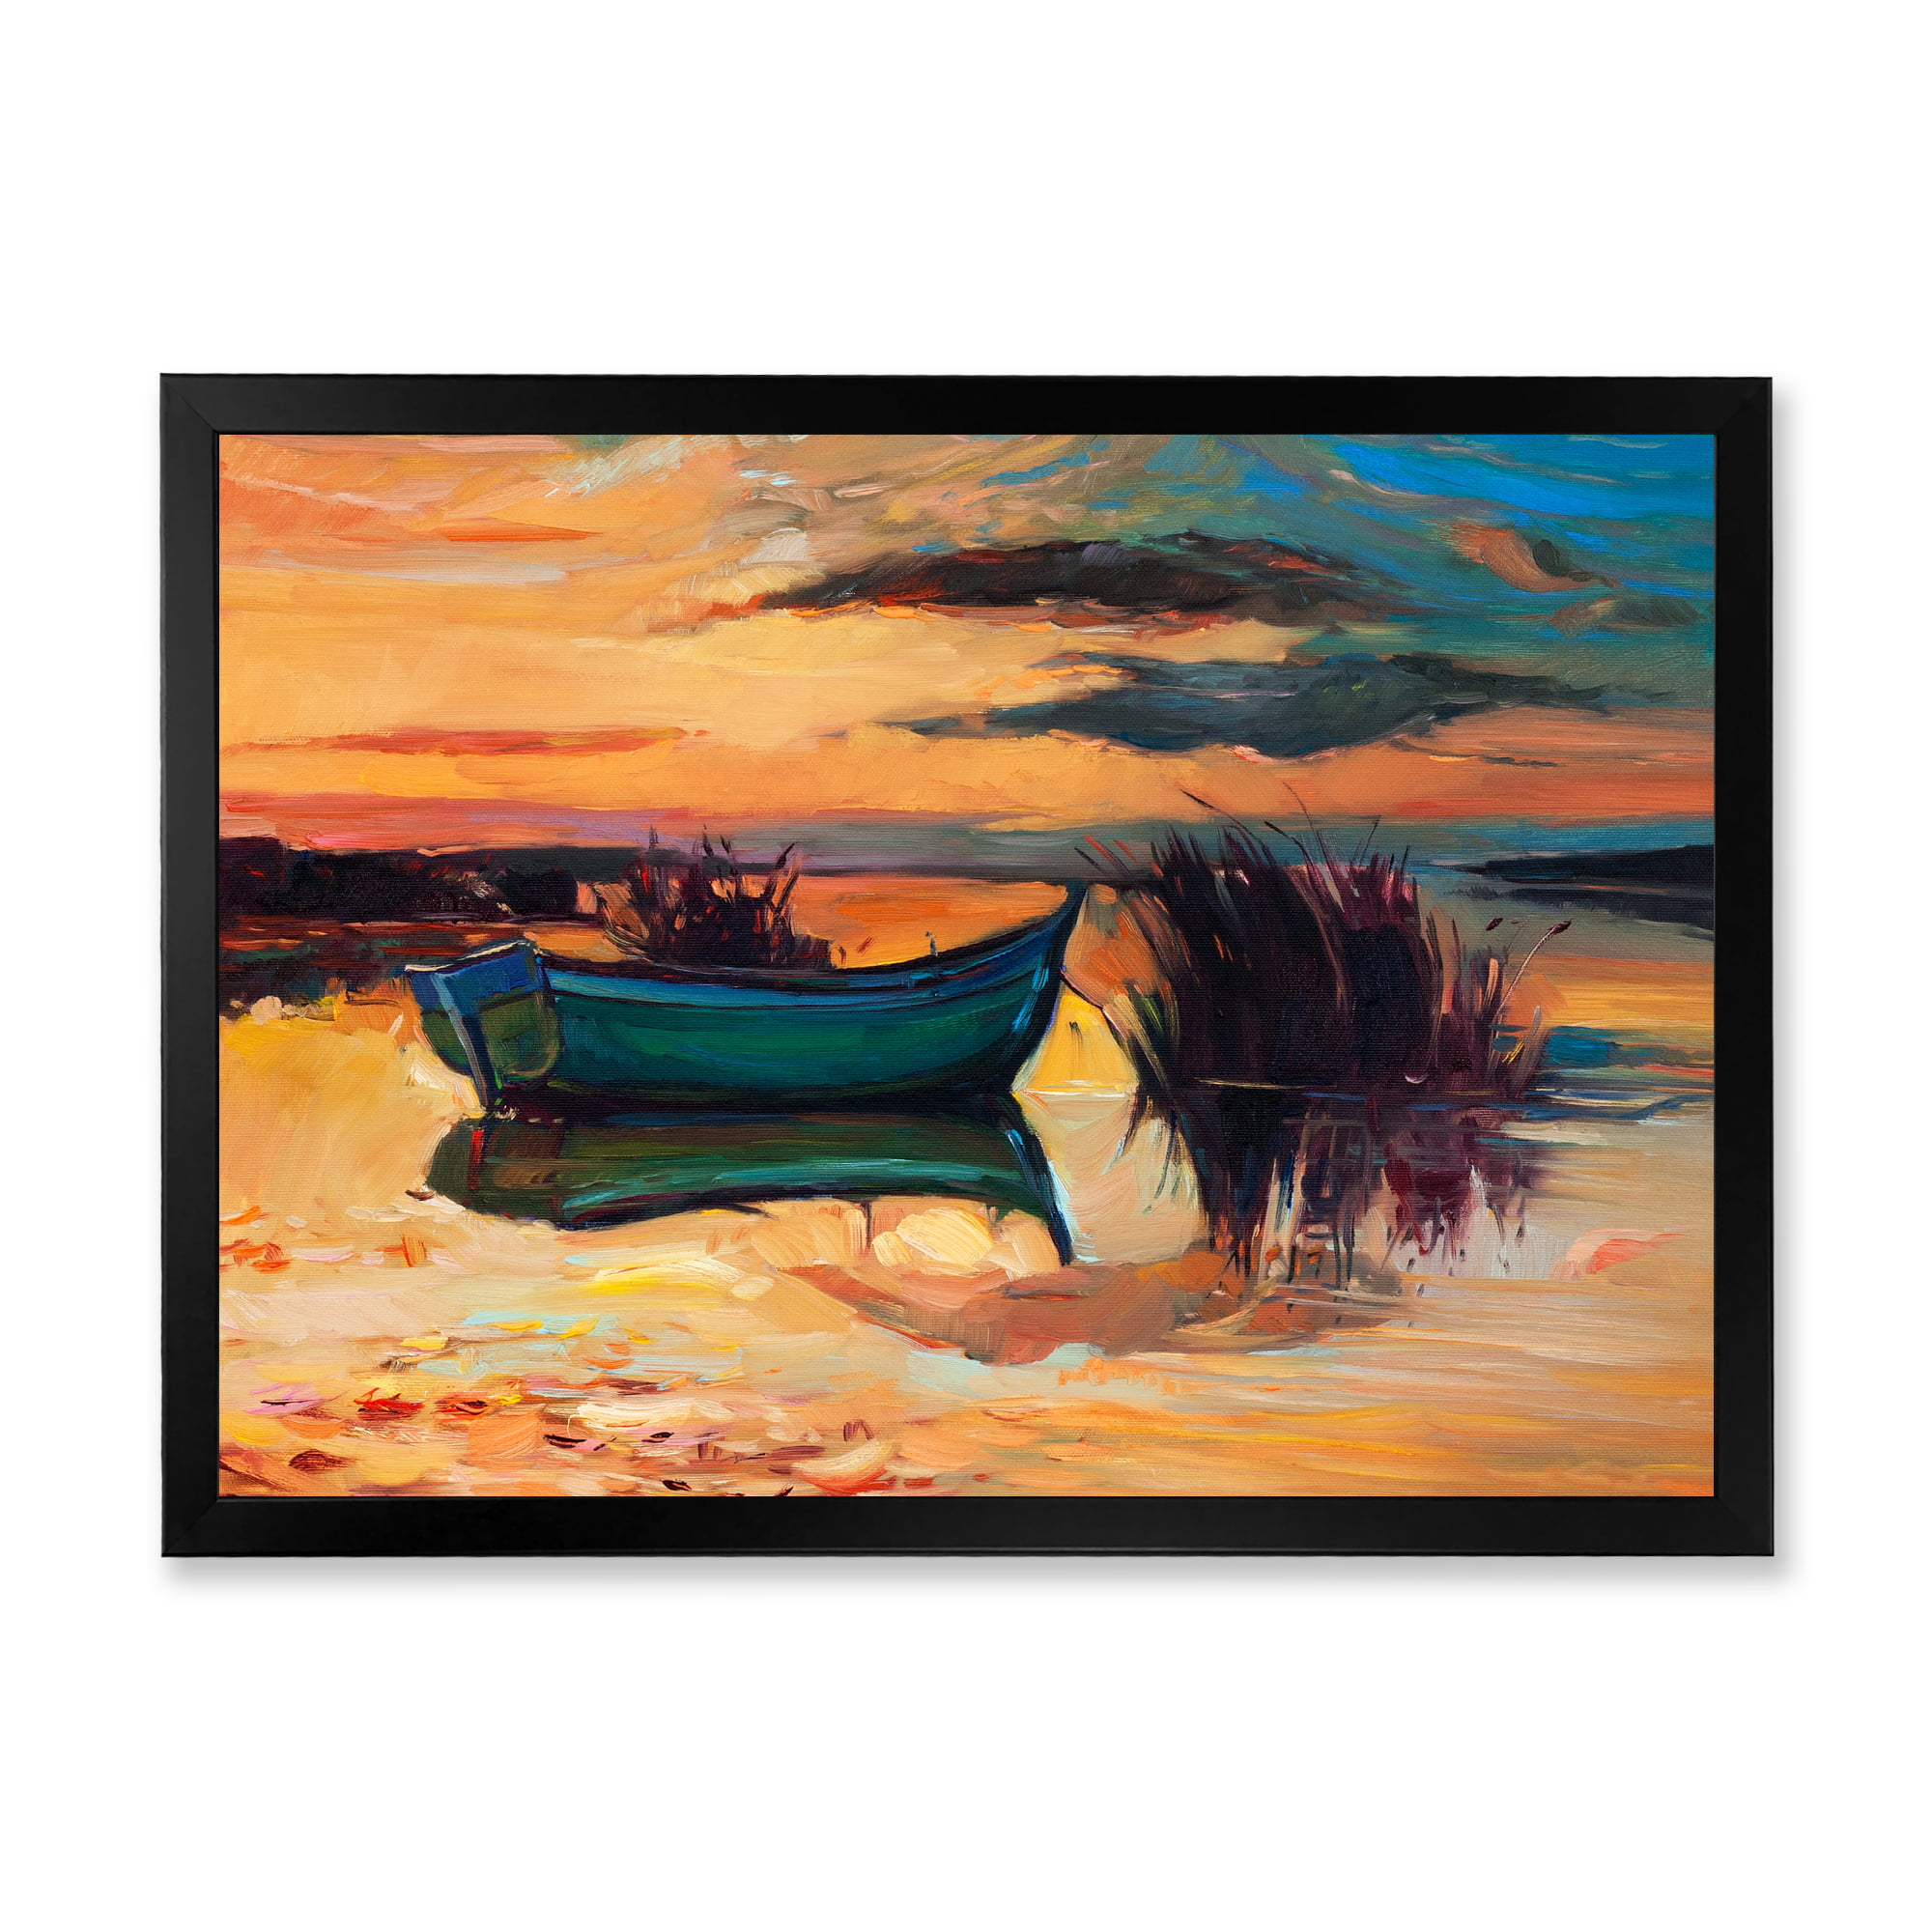 Fishing Boat on Shore Canvas Print Huge Framed Wall Art Decor Cotton Canvas 